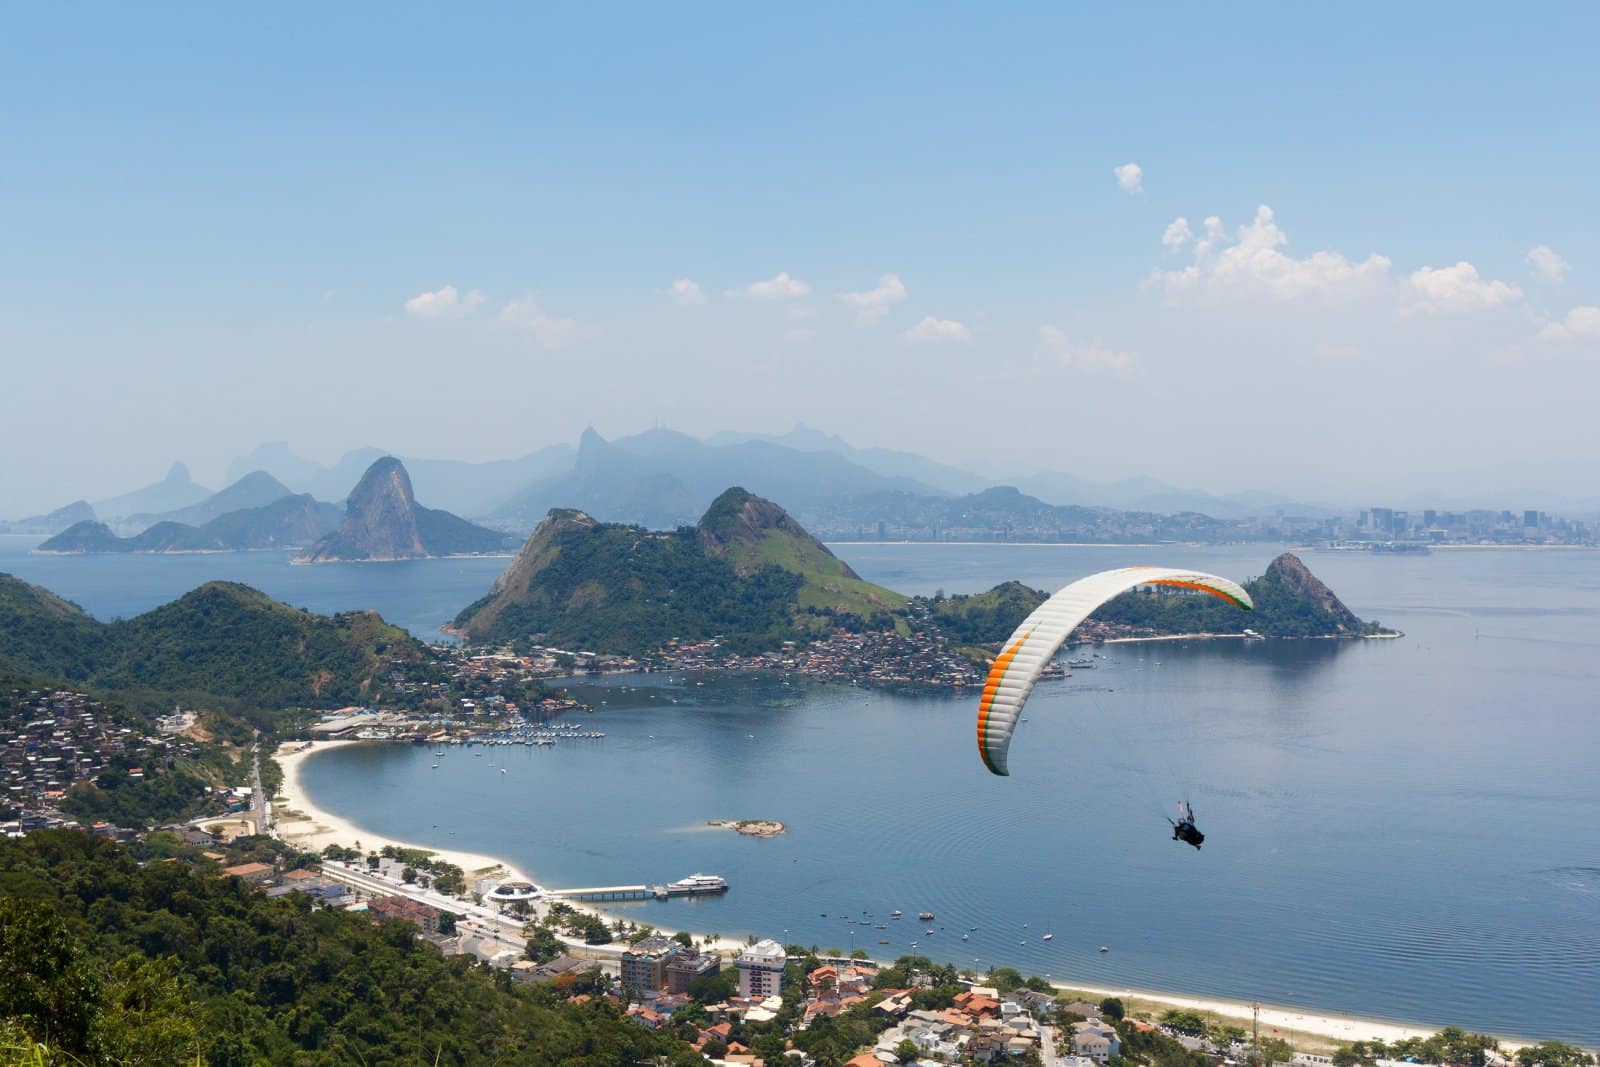 <p class="wp-caption-text">Image Credit: Shutterstock / Iuliia Timofeeva</p>  <p>Feel the wind rush through your hair as you soar like a bird above the breathtaking vistas of Rio de Janeiro. Strap in tight with an experienced pilot and take the leap from Pedra Bonita for an adrenaline-pumping ride over iconic landmarks like Copacabana Beach and Sugarloaf Mountain.</p>